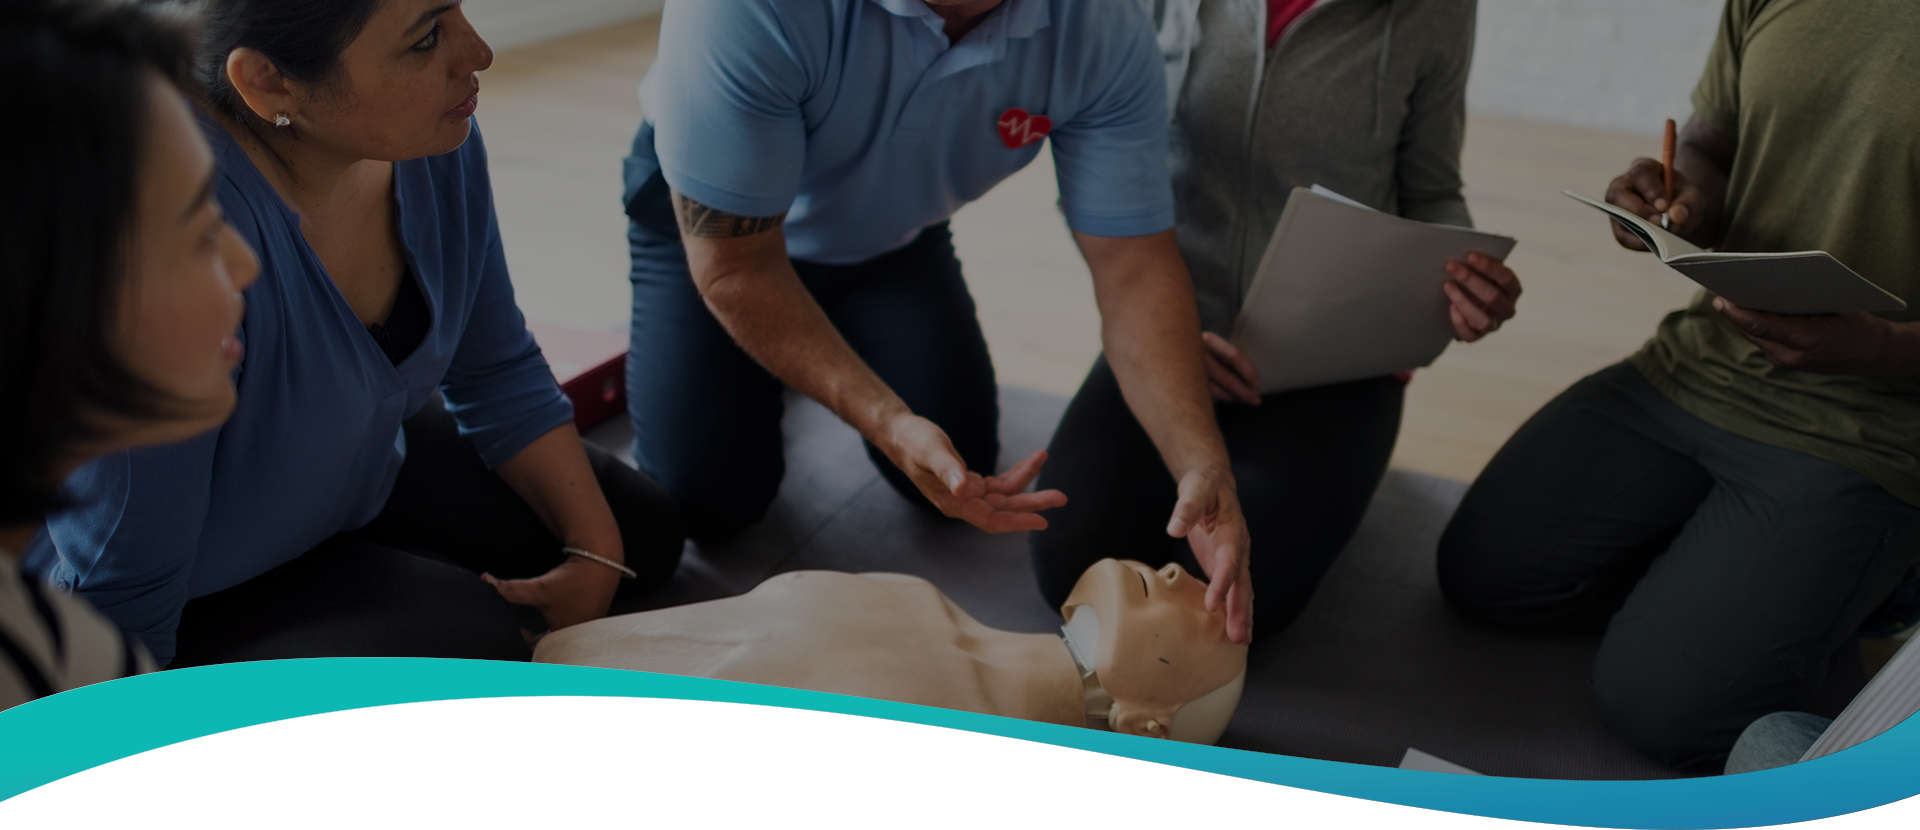 We provide training in First Aid, Health and Safety, Fire and Safety and Health Professionals Courses.